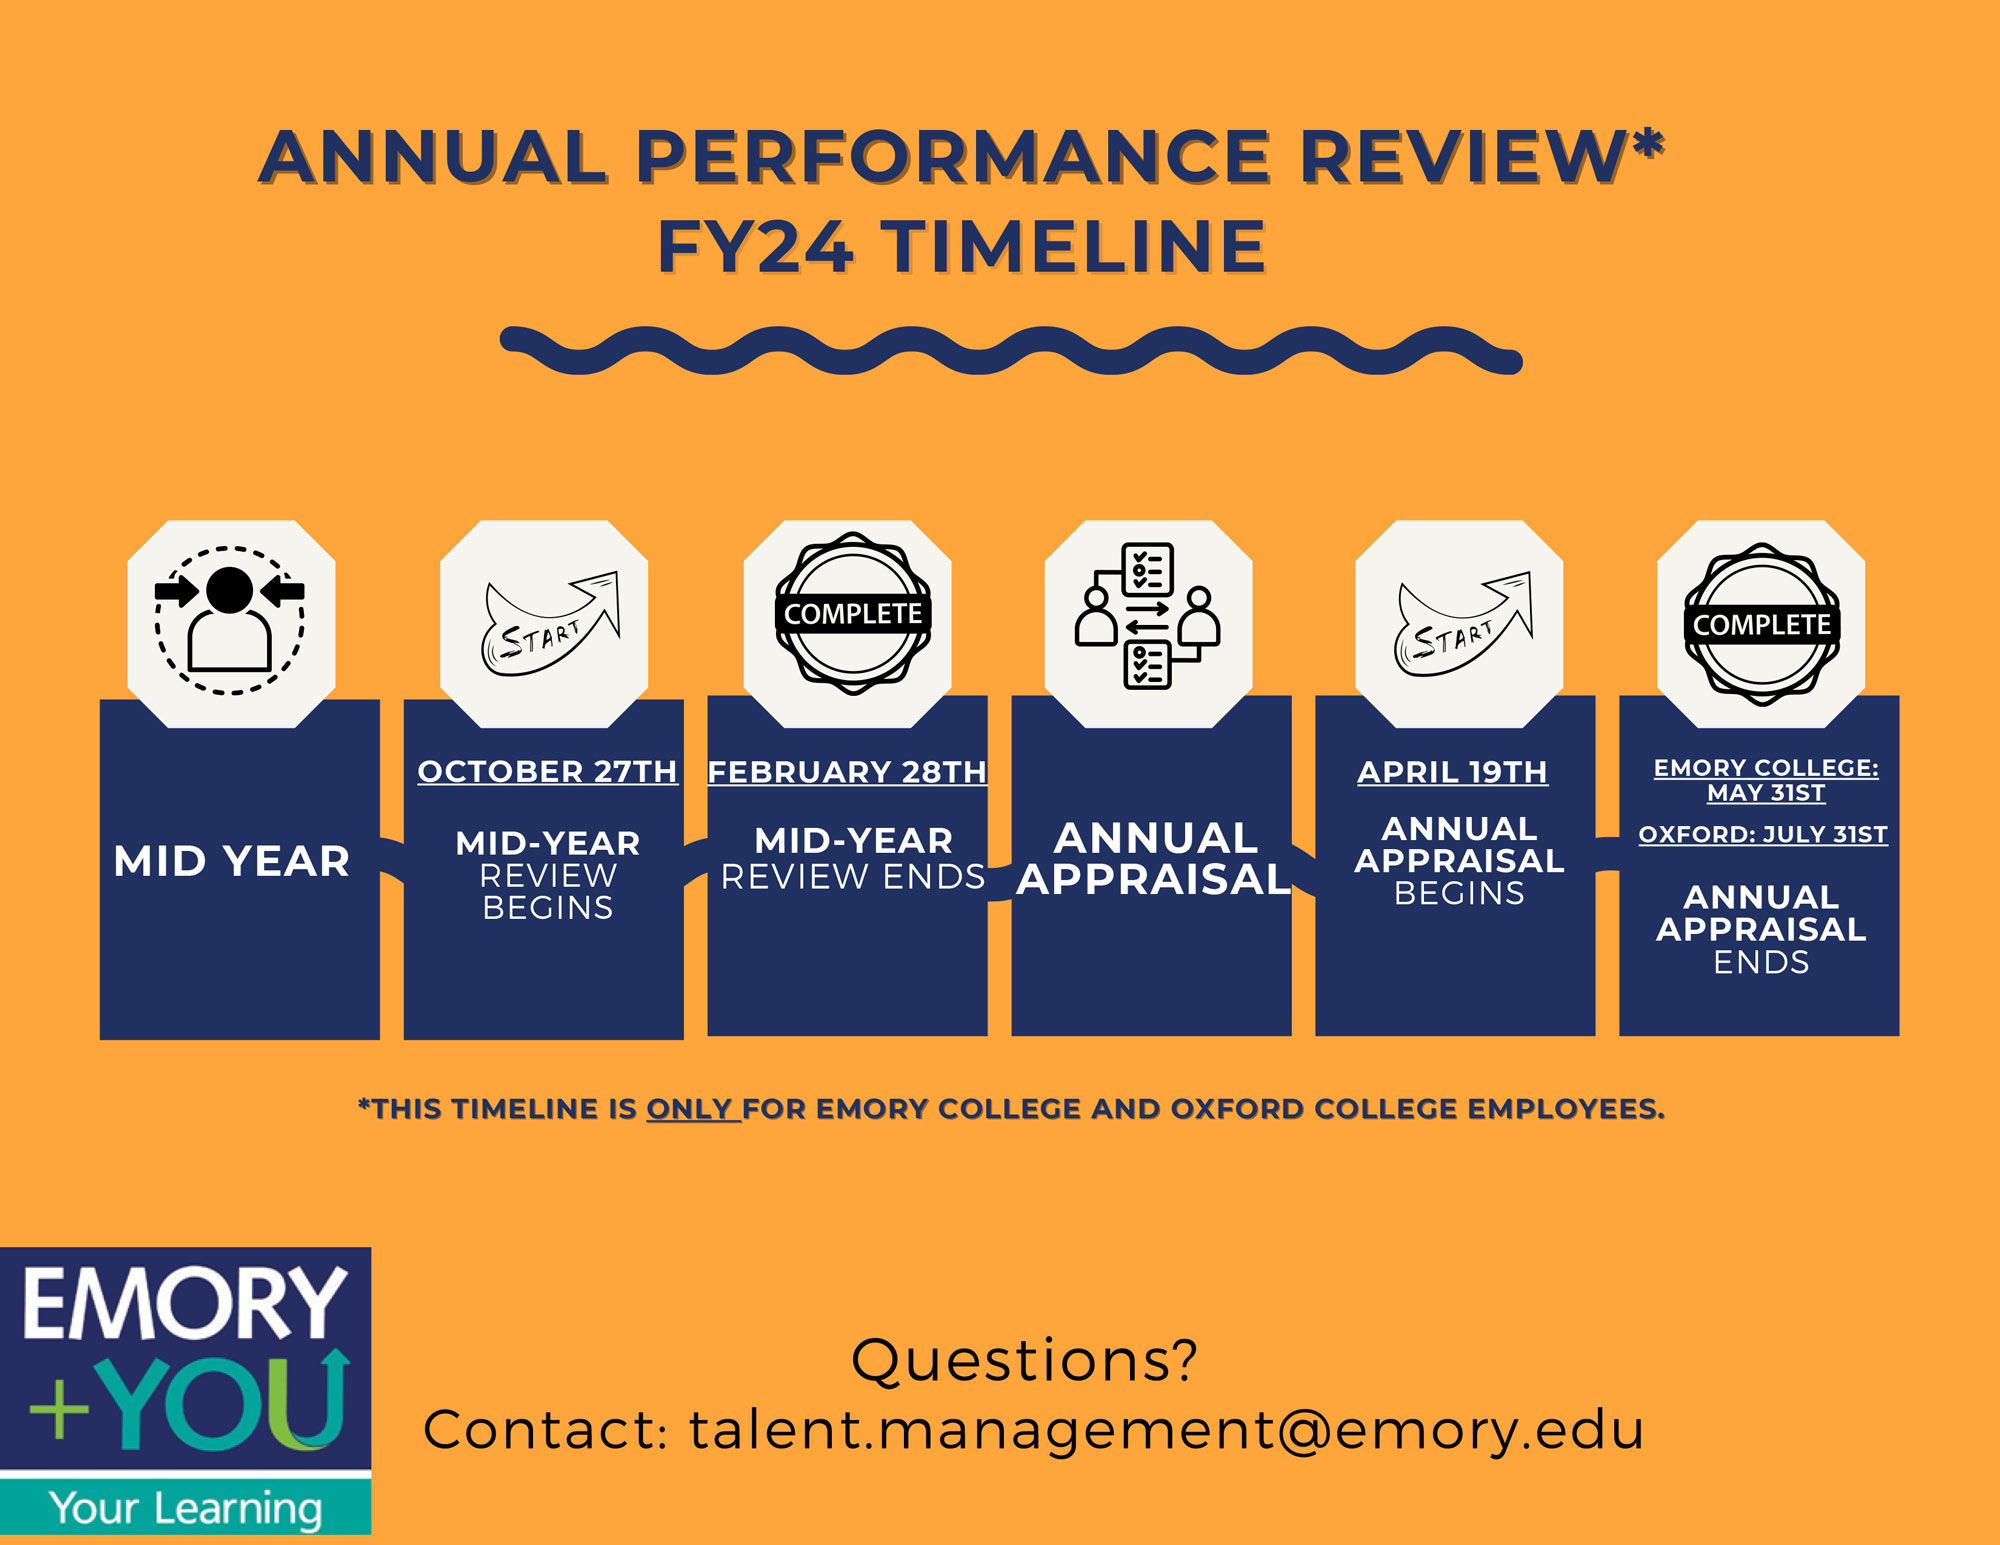 Timeline for Emory College and Oxford College Performance Reviews